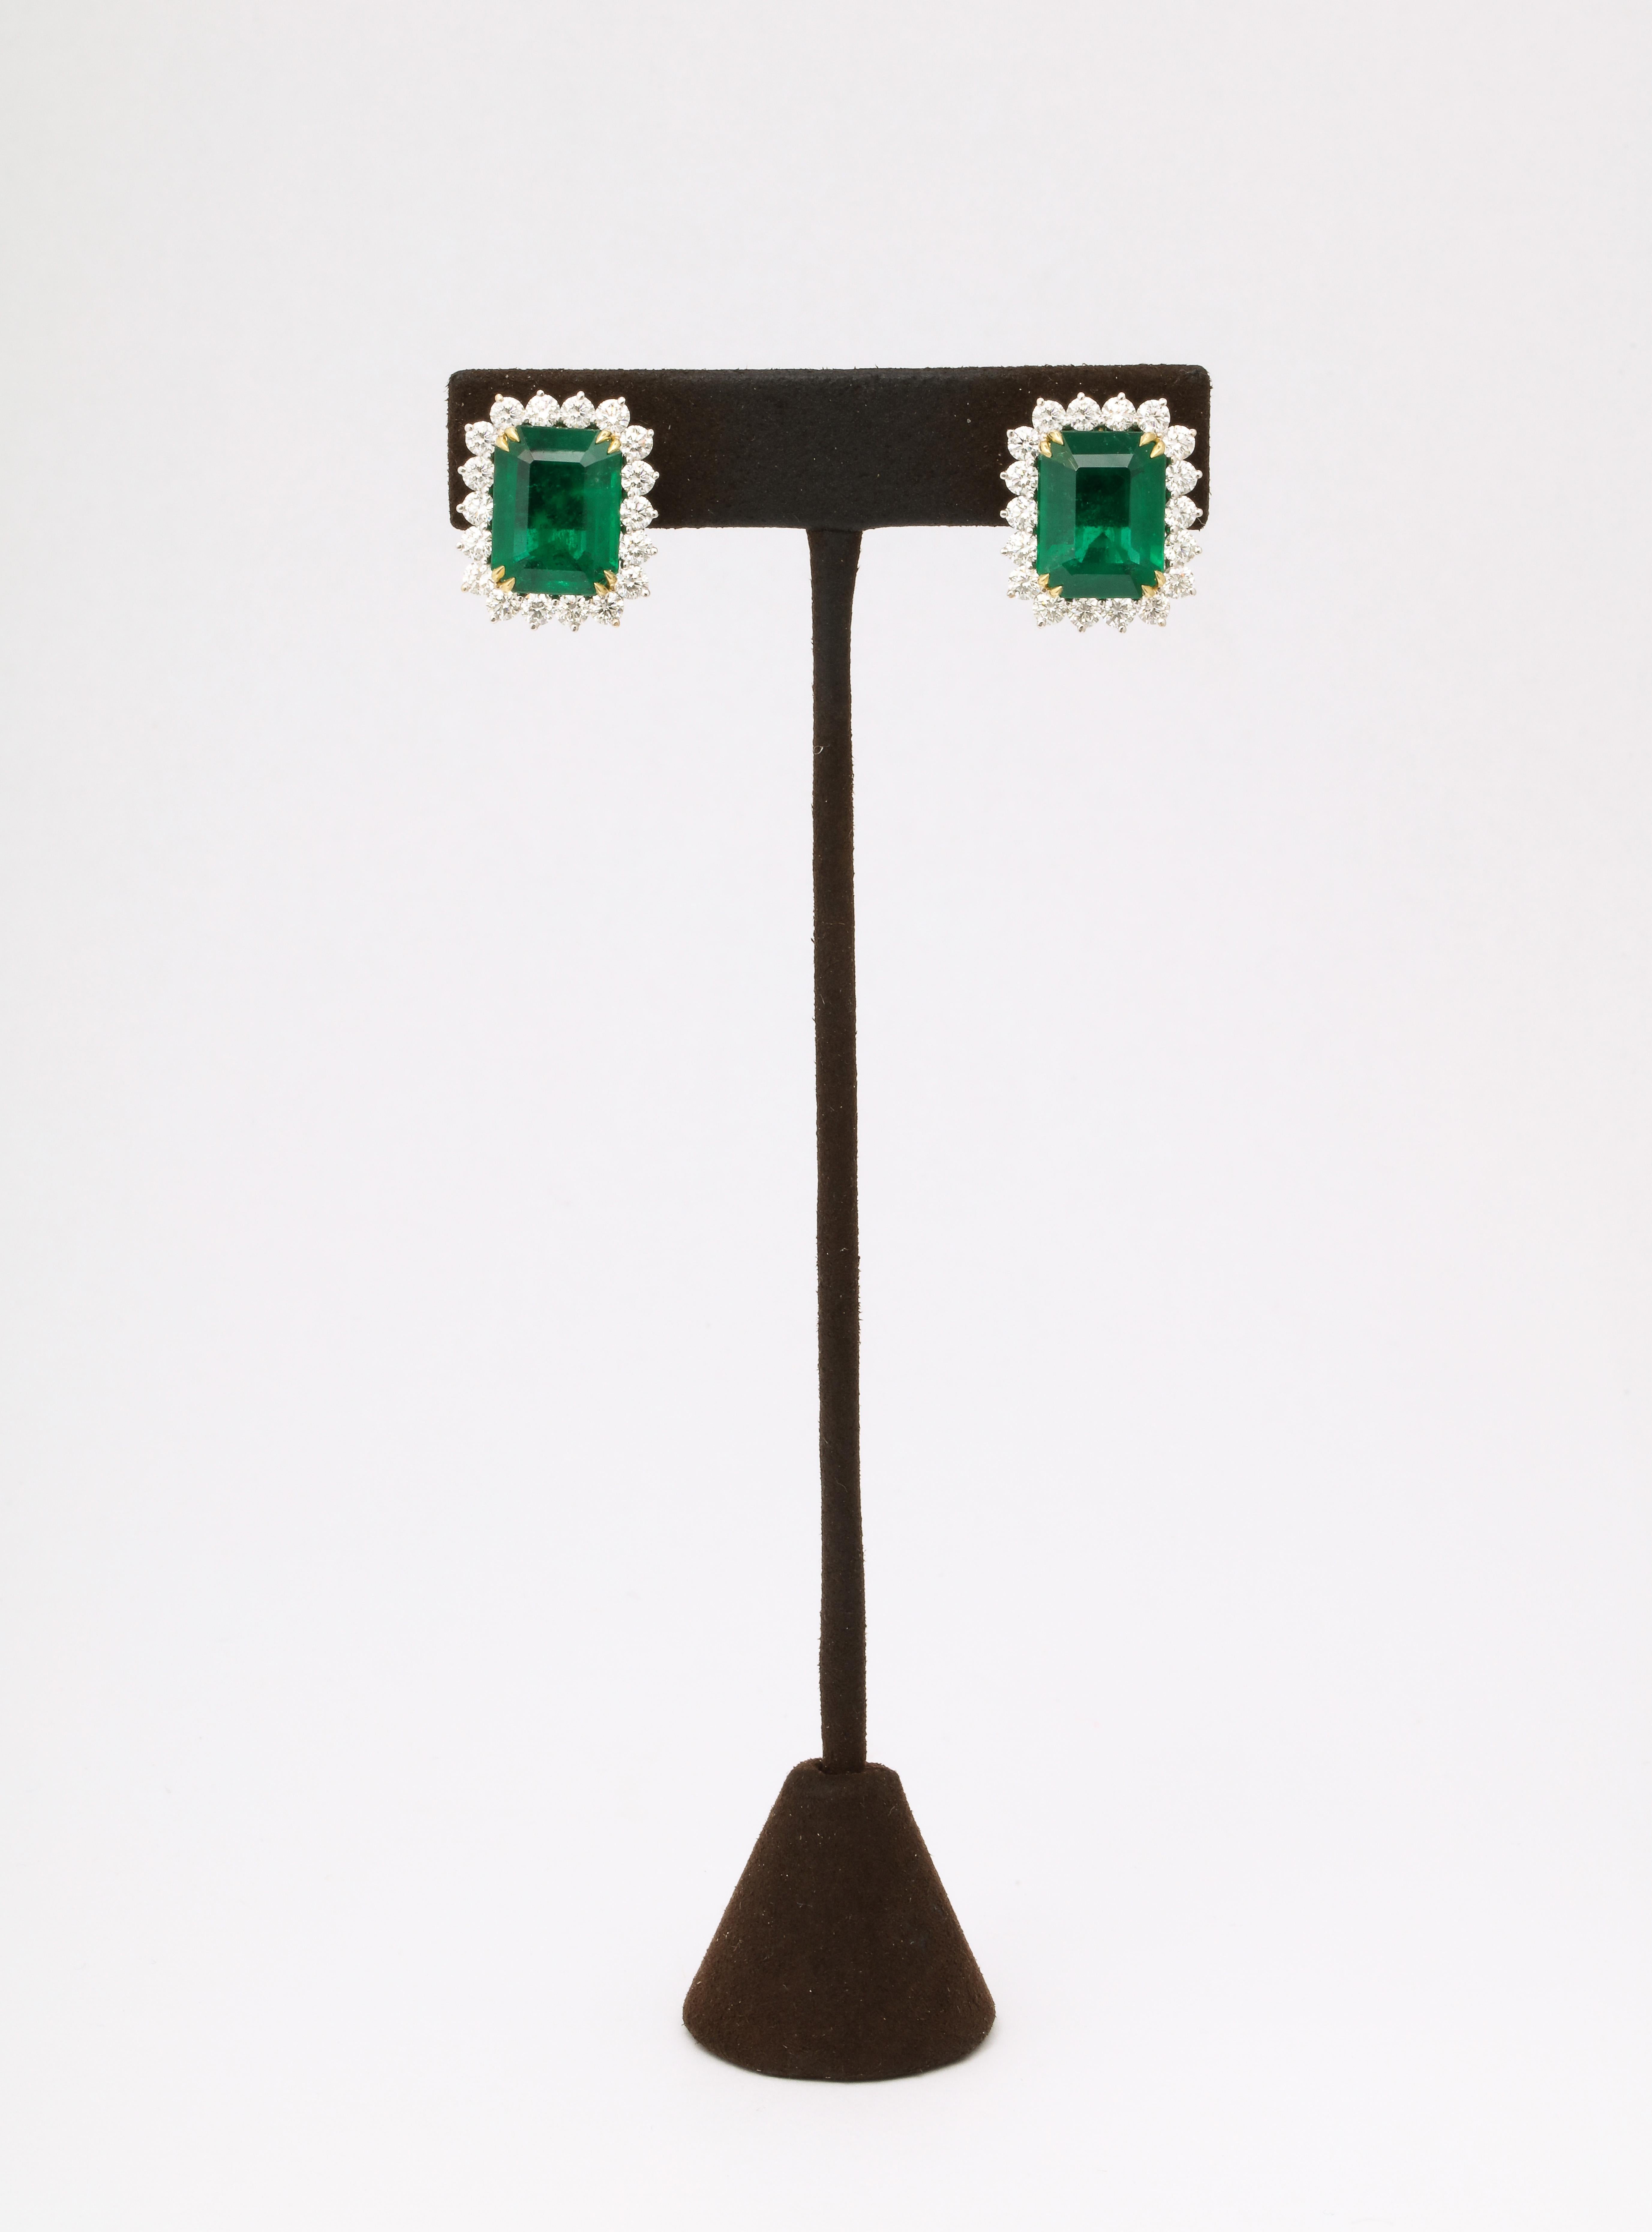 
A STUNNING pair of Emeralds with fabulous color and luster. 

16.15 carats of certified Vivid Green Emerald Cut Emeralds surrounded by 3.43 carats of white round brilliant cut diamonds. 

Set in a custom 18k white gold mounting with yellow gold